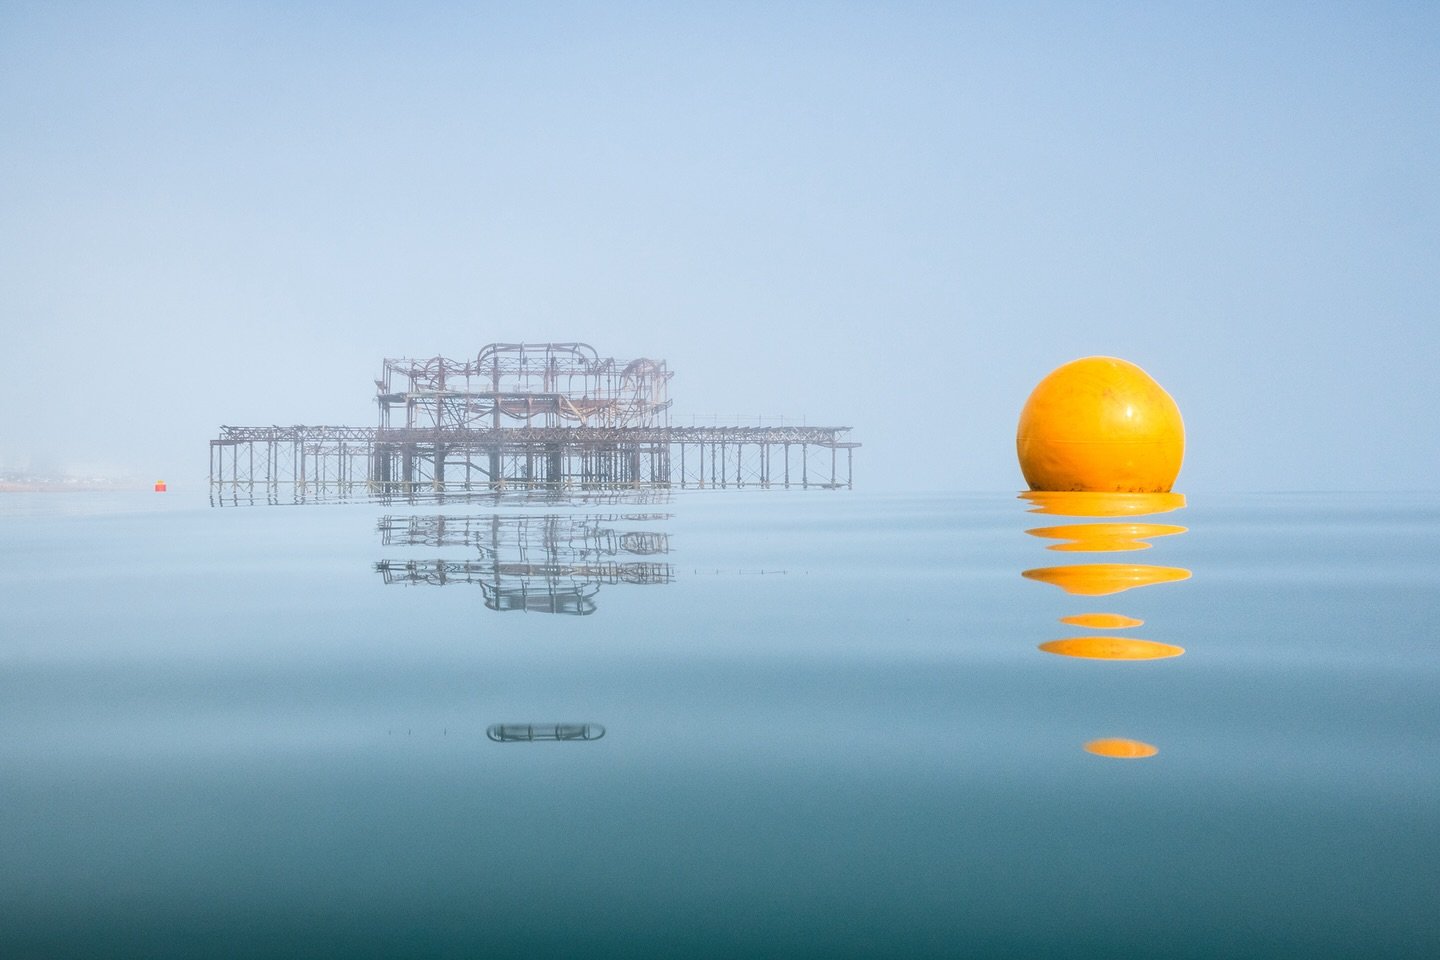 Good morning Brighton, hope that you&rsquo;re all enjoying the new calendar &lsquo;Sea View&rsquo; picture for May. The swim buoys were put back in place again earlier this week so summer has officially arrived (accompanied by thunderstorms, rain and